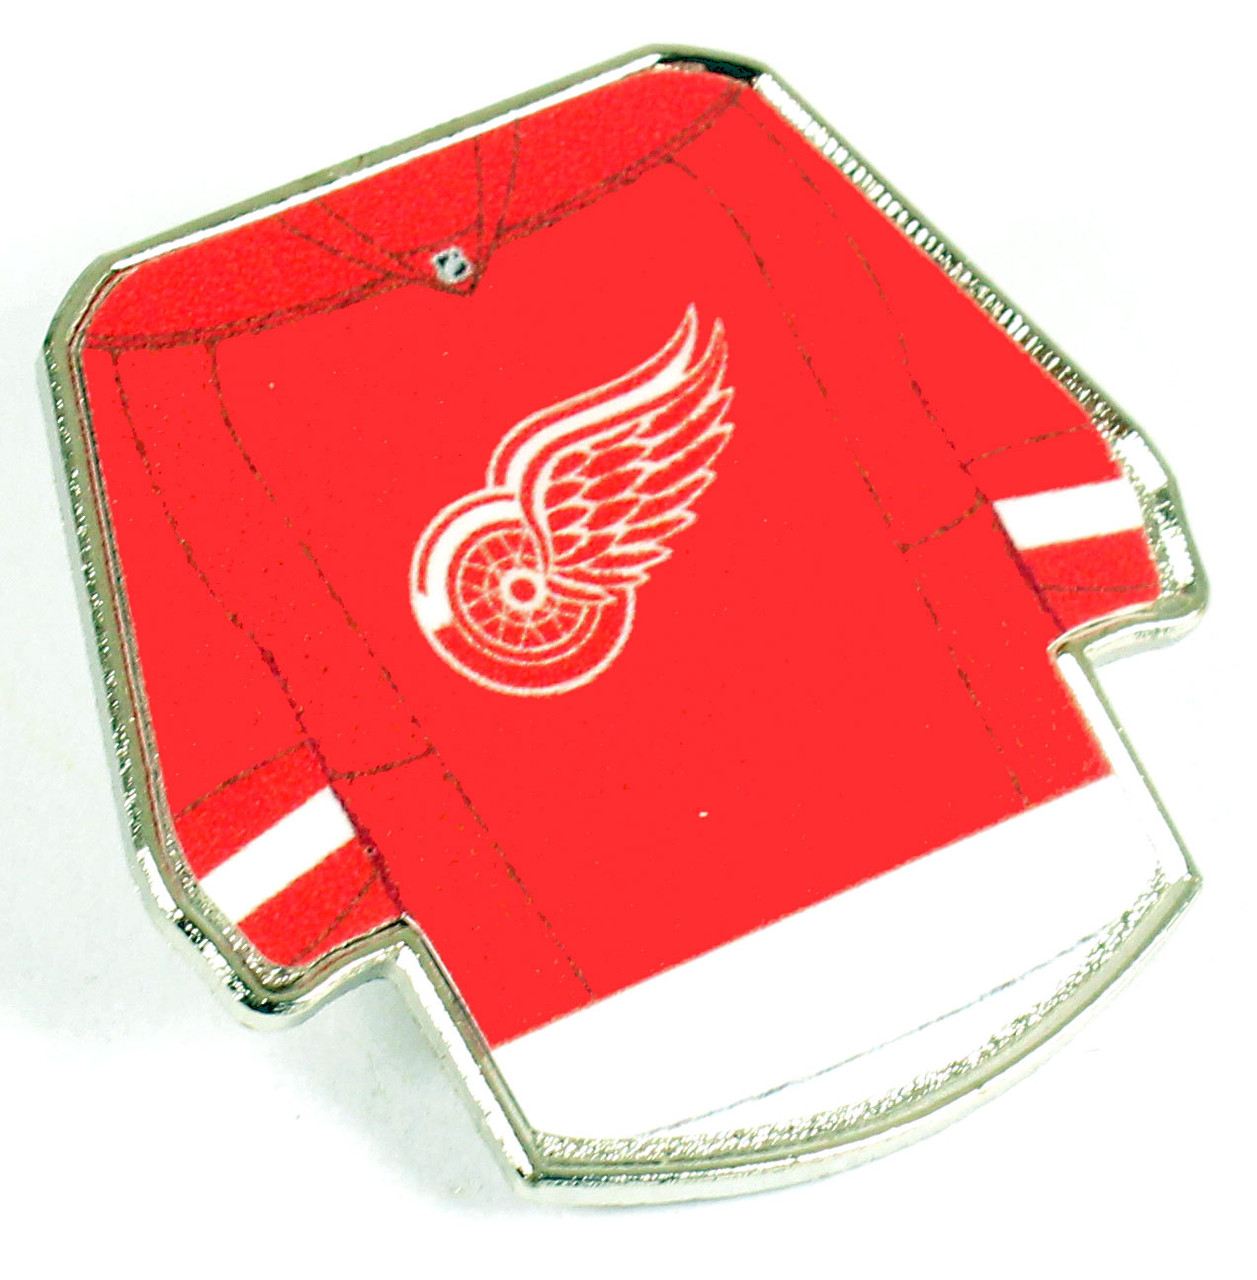 Detroit Red Wings Triumph Pin